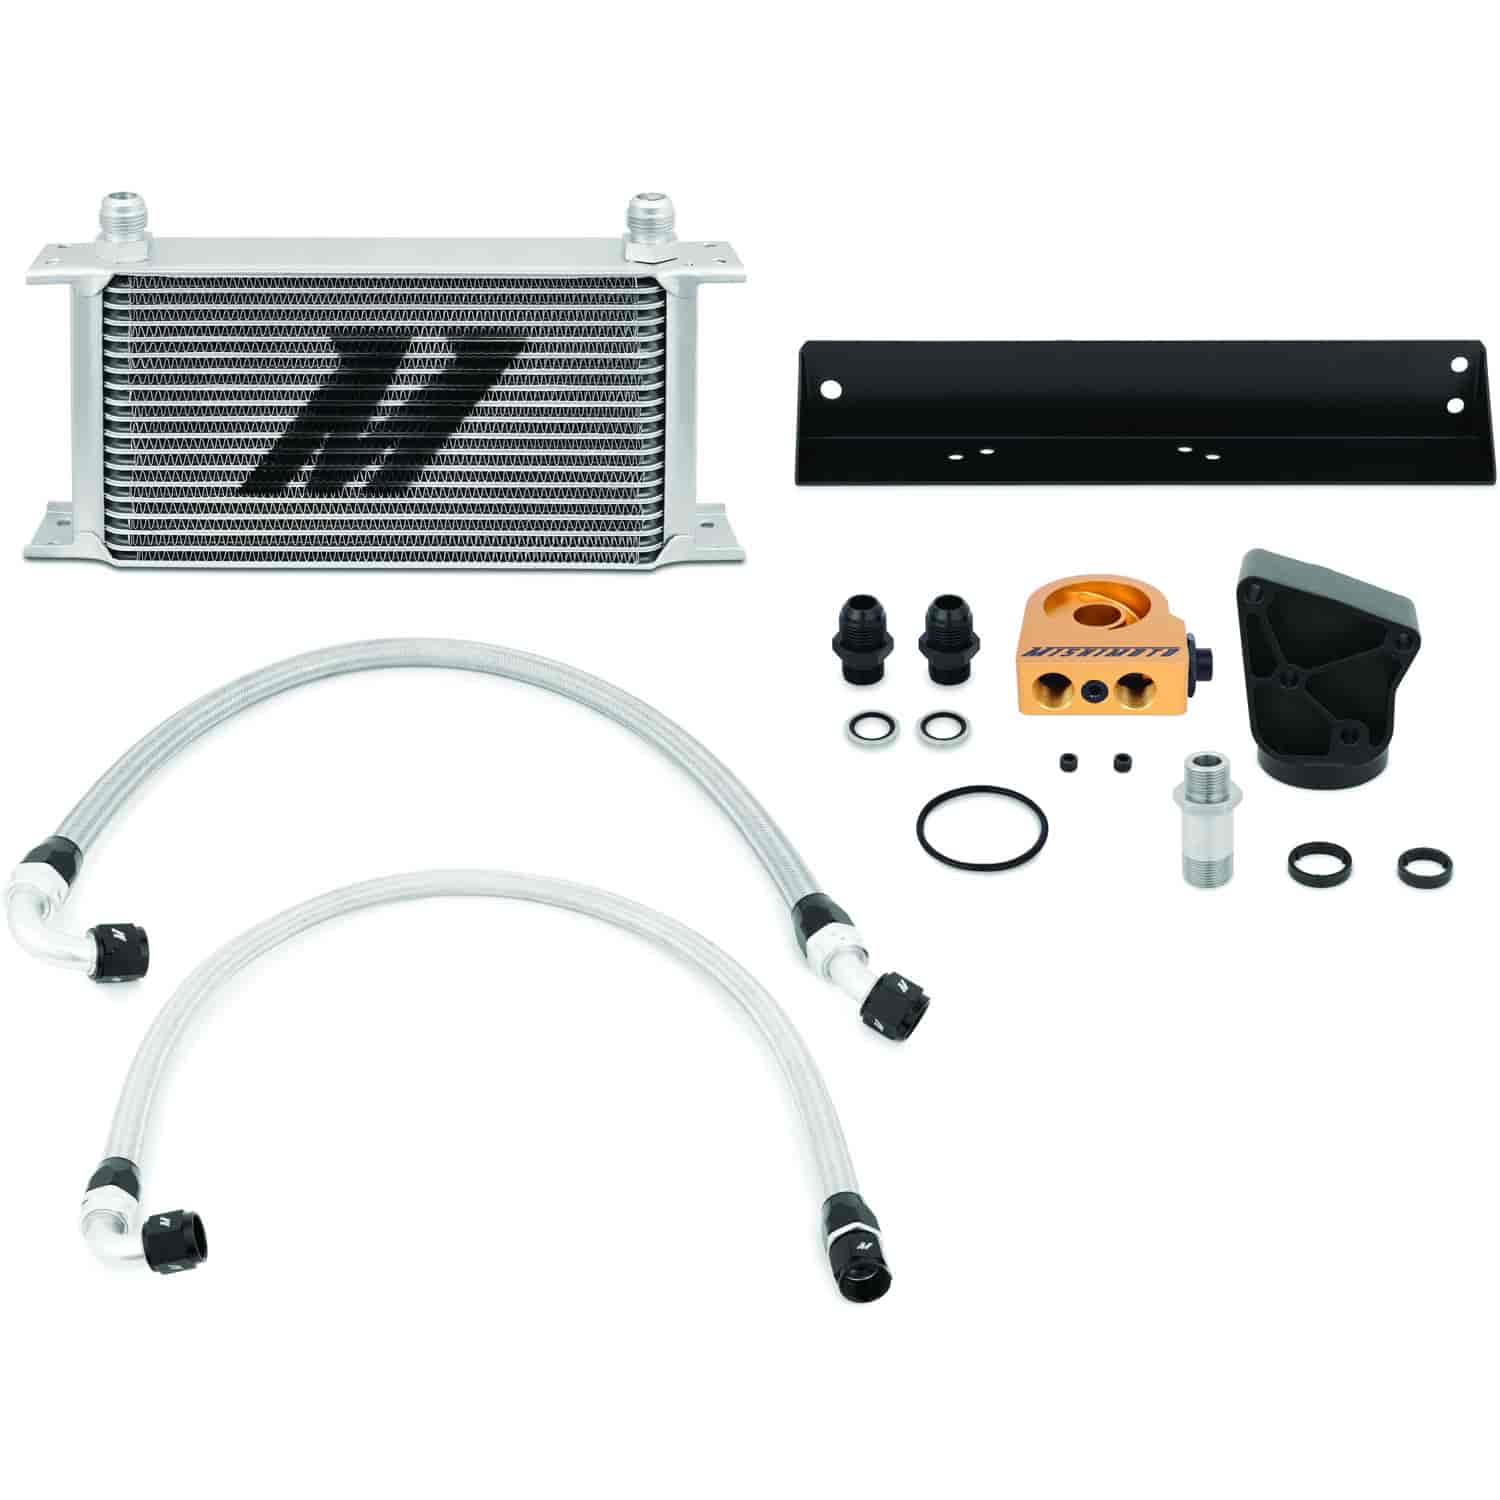 Hyundai Genesis Coupe 3.8L Thermostatic Oil Cooler Kit - MFG Part No. MMOC-GEN6-10T